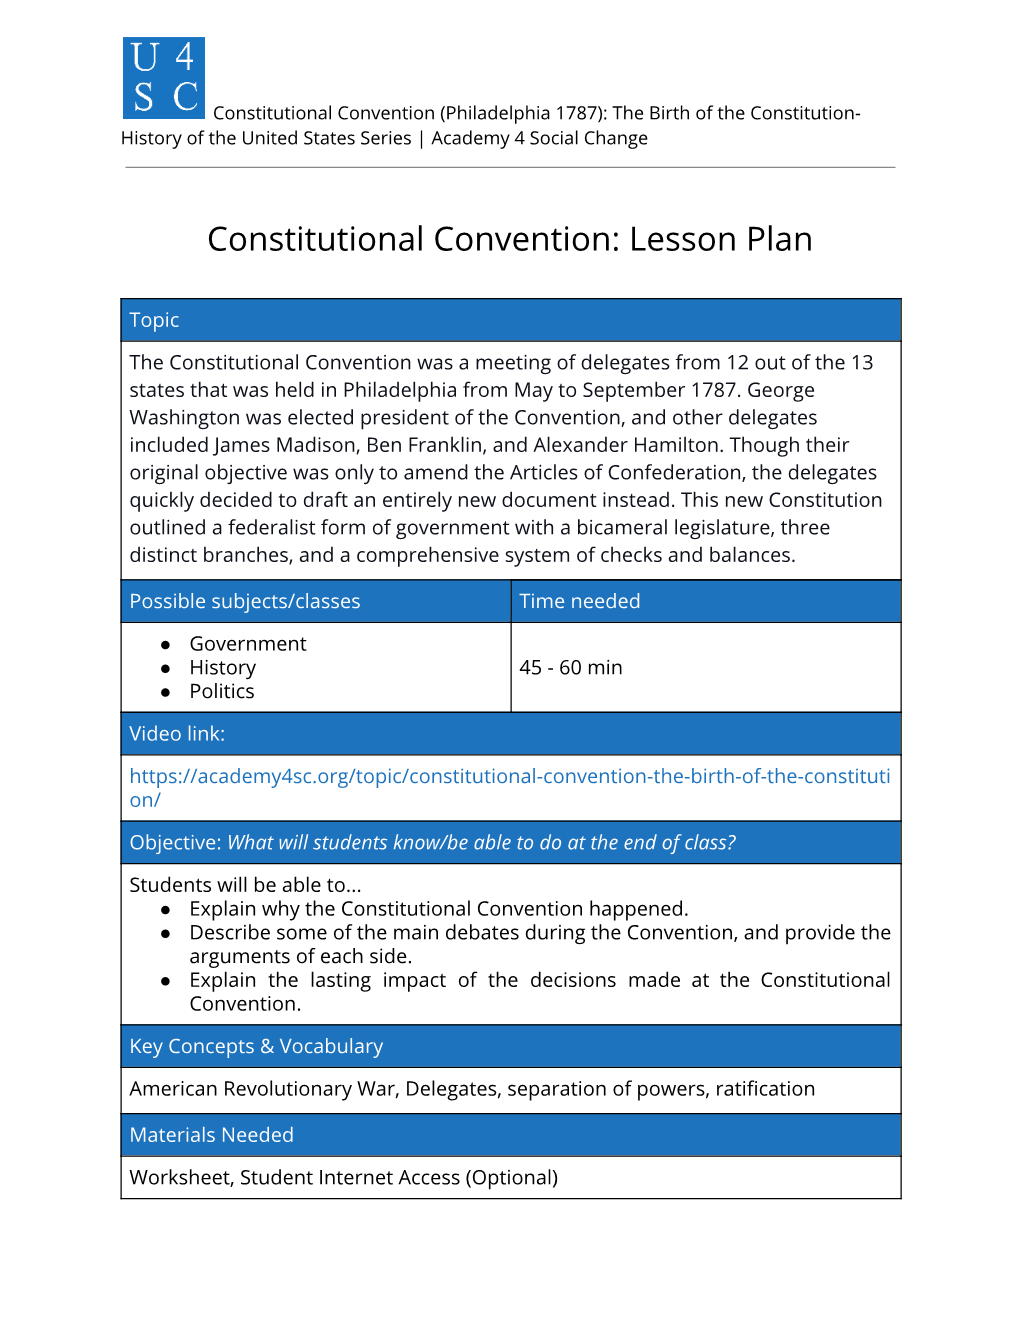 Constitutional Convention: Lesson Plan